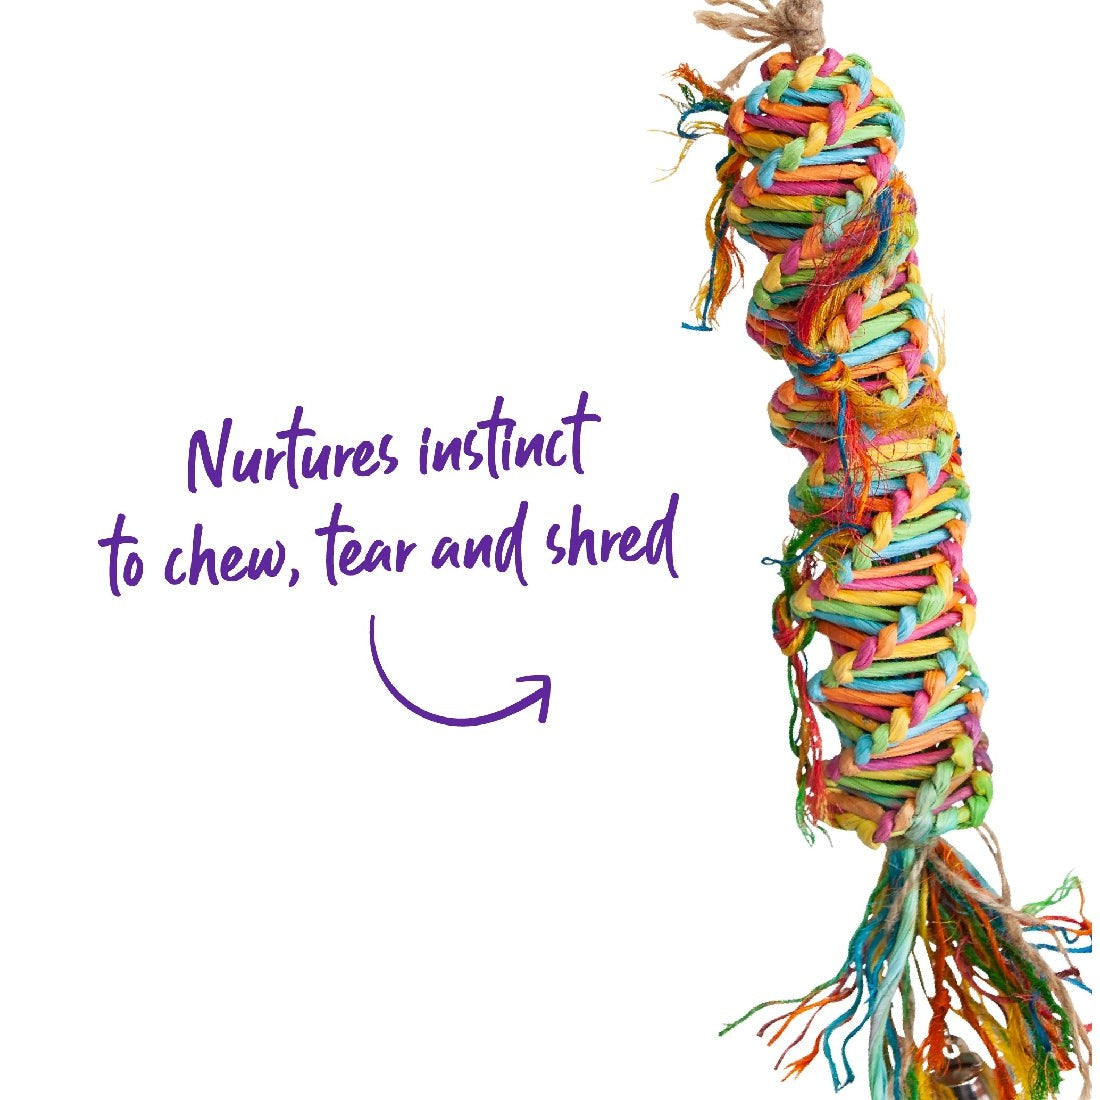 Colorful knotted bird toy designed to nurture chewing instincts.